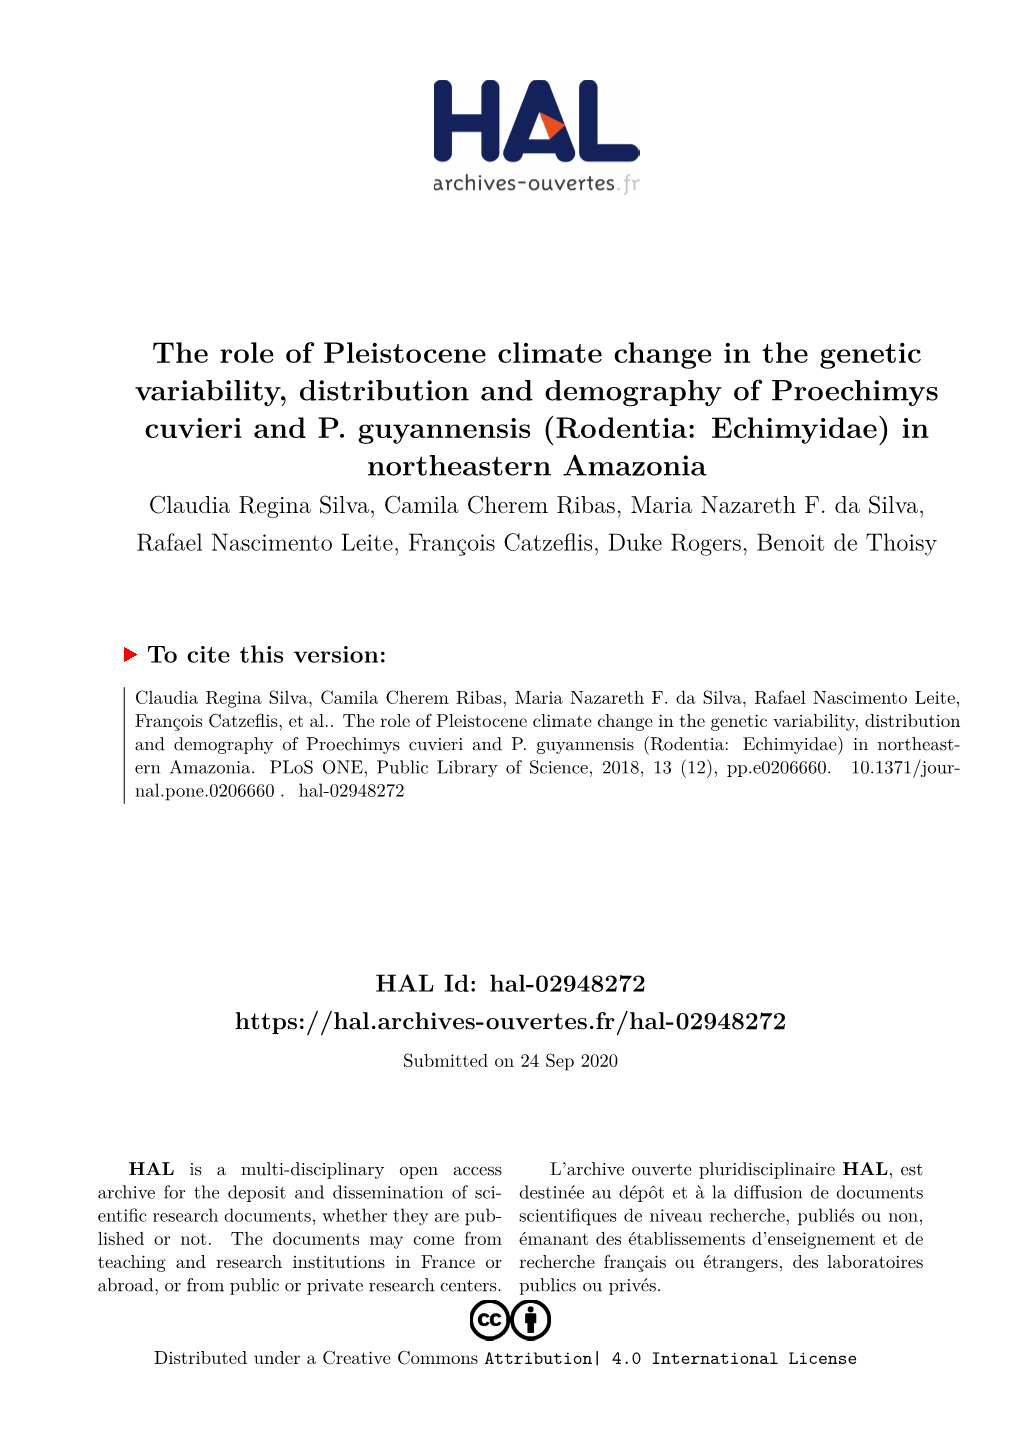 The Role of Pleistocene Climate Change in the Genetic Variability, Distribution and Demography of Proechimys Cuvieri and P